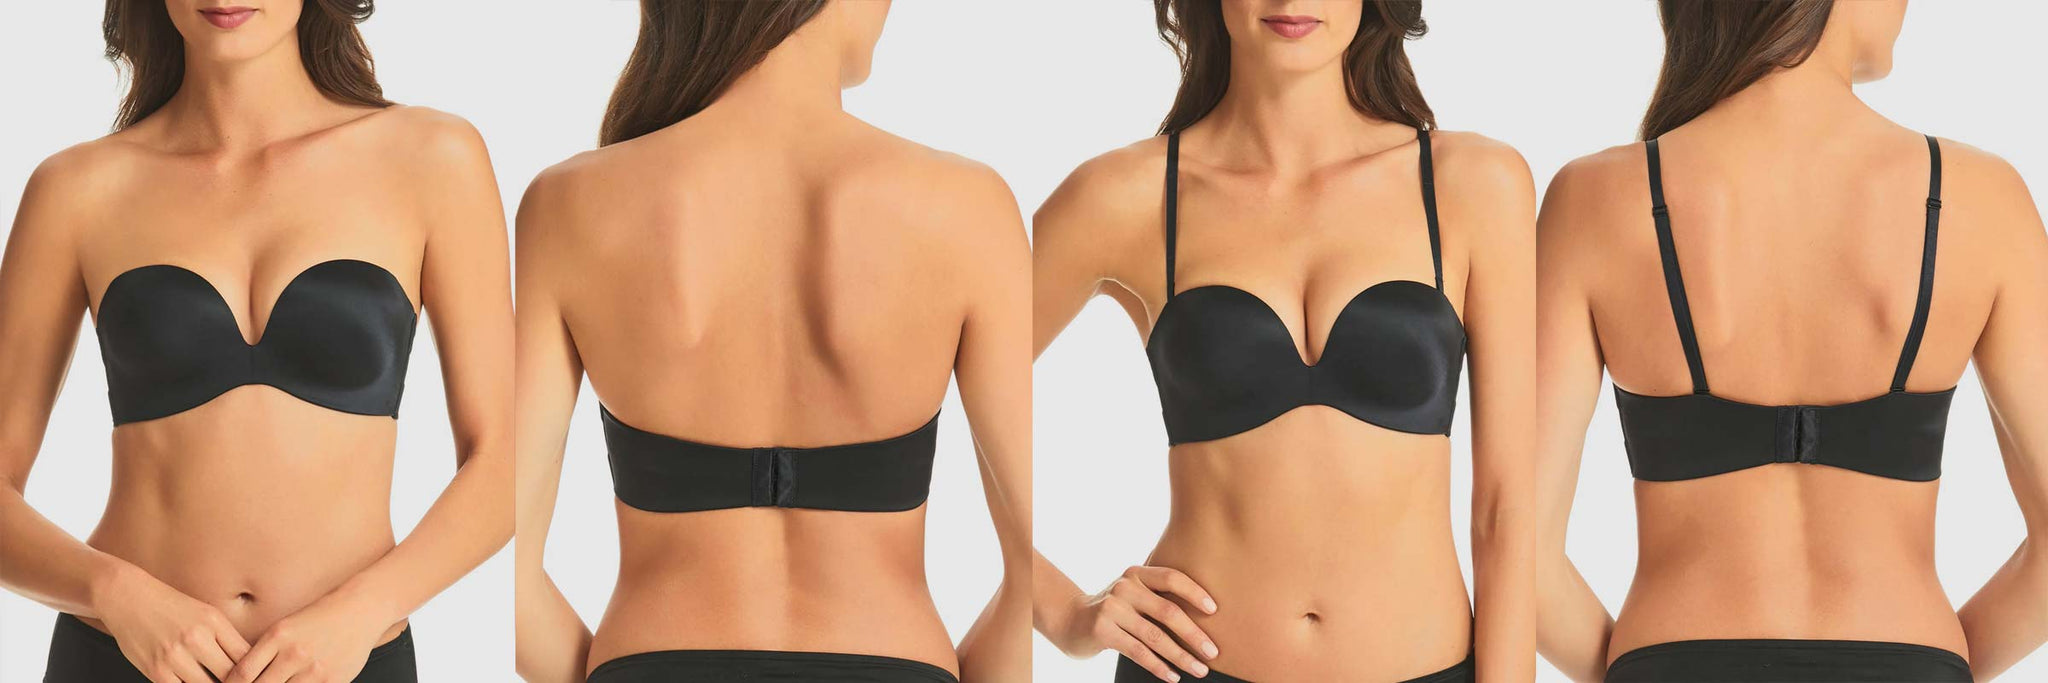 Plus Strapping Wing Super Push Up Bra